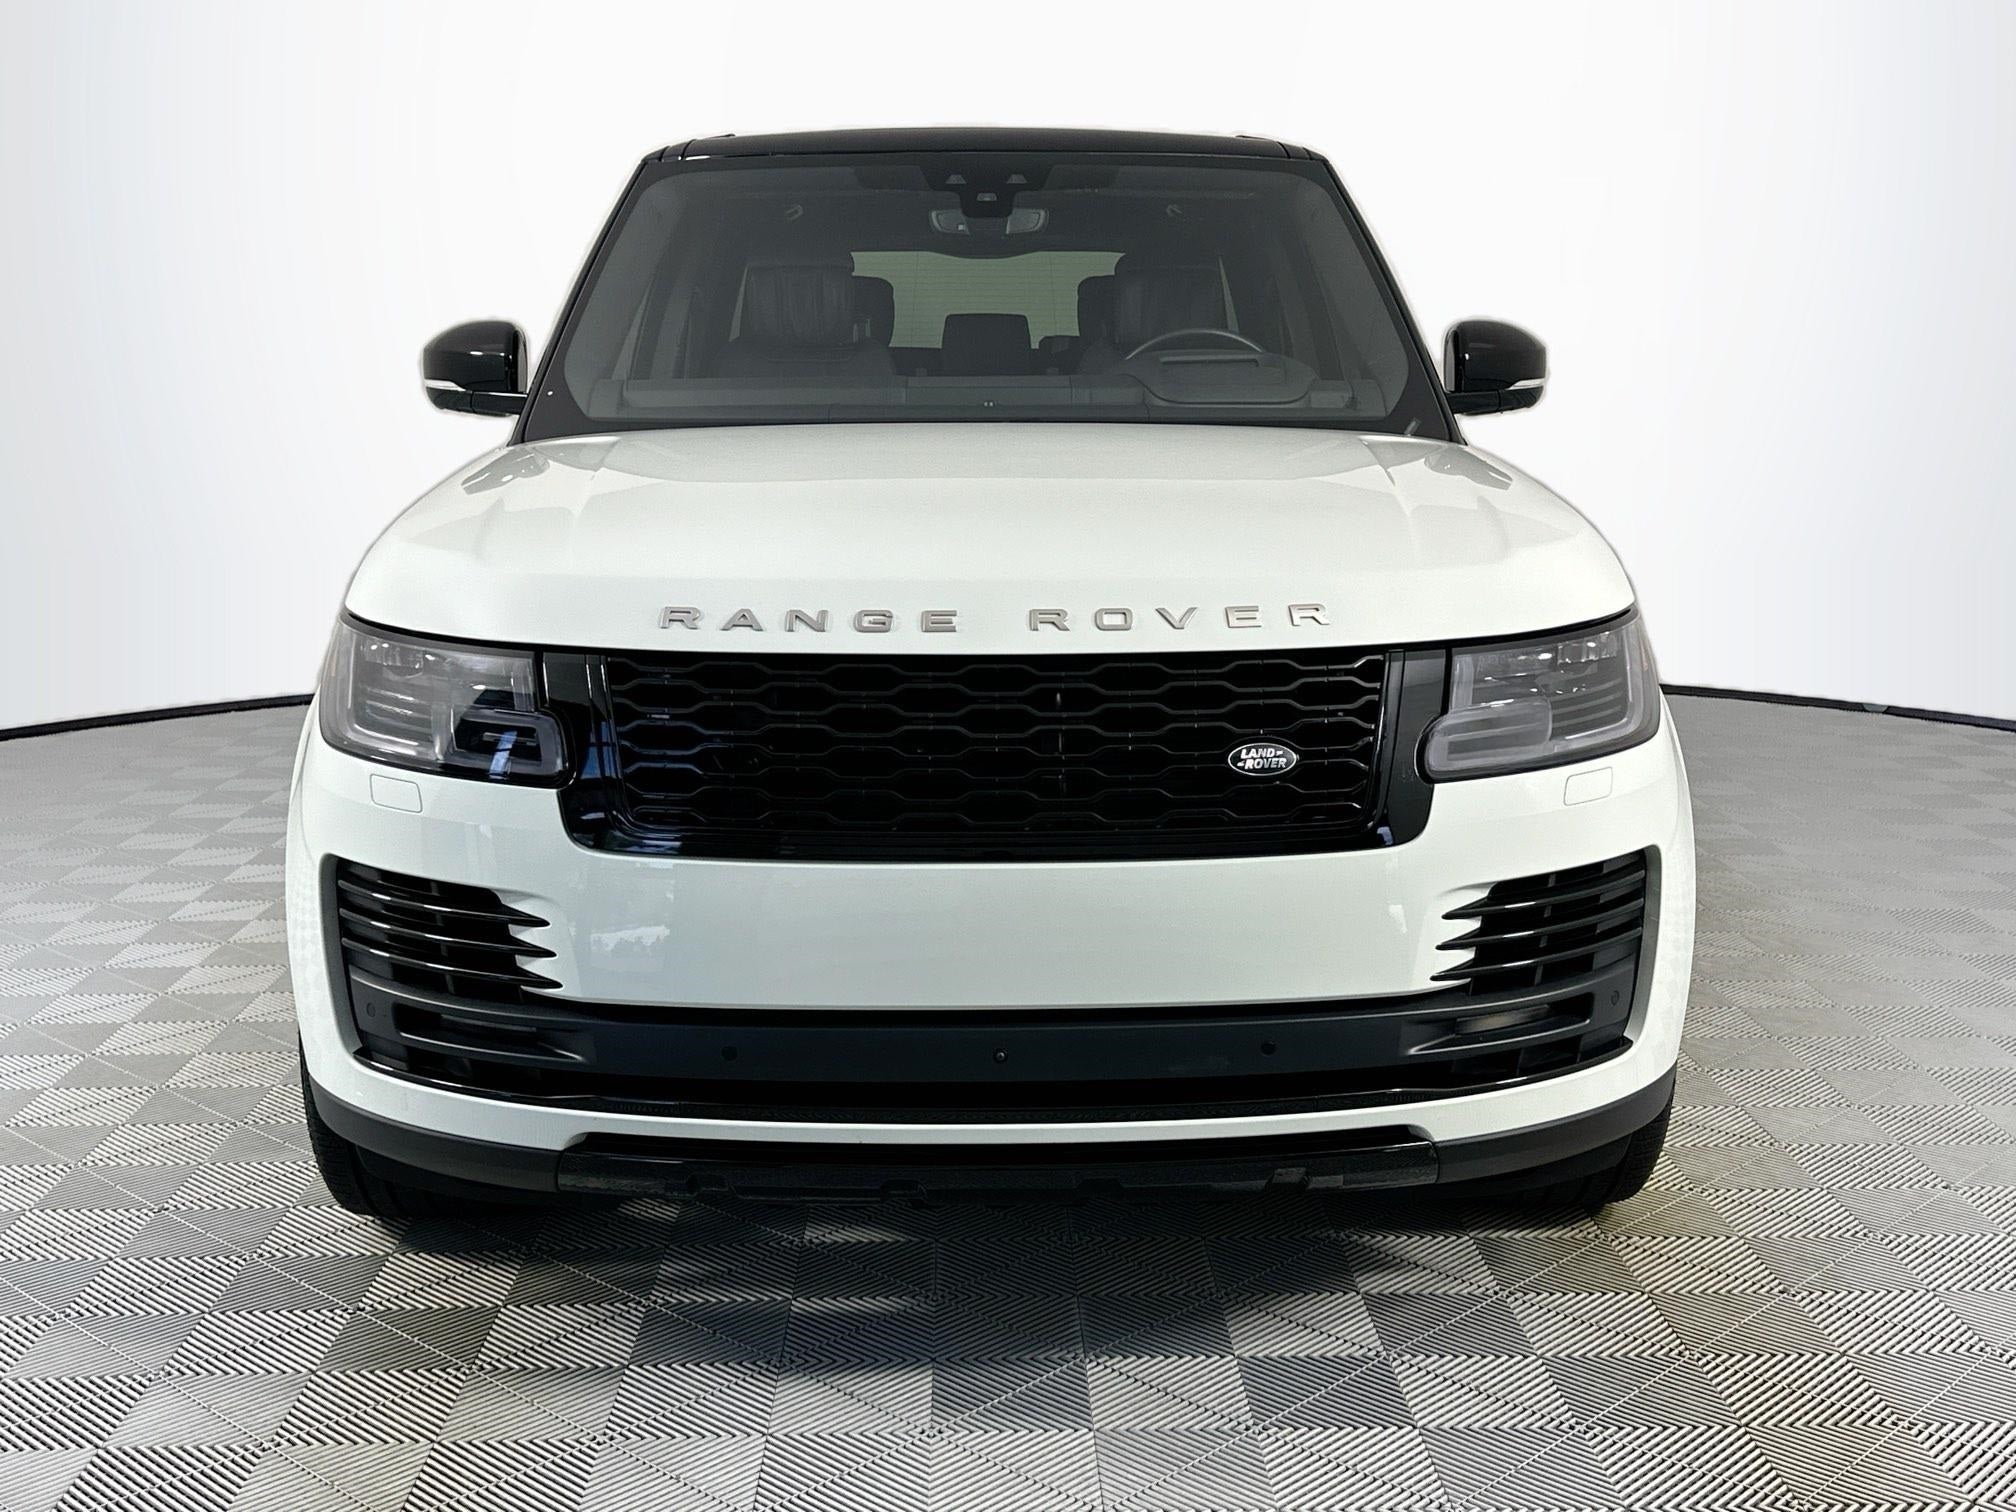 2021 Land Rover Range Rover Fifty LWB